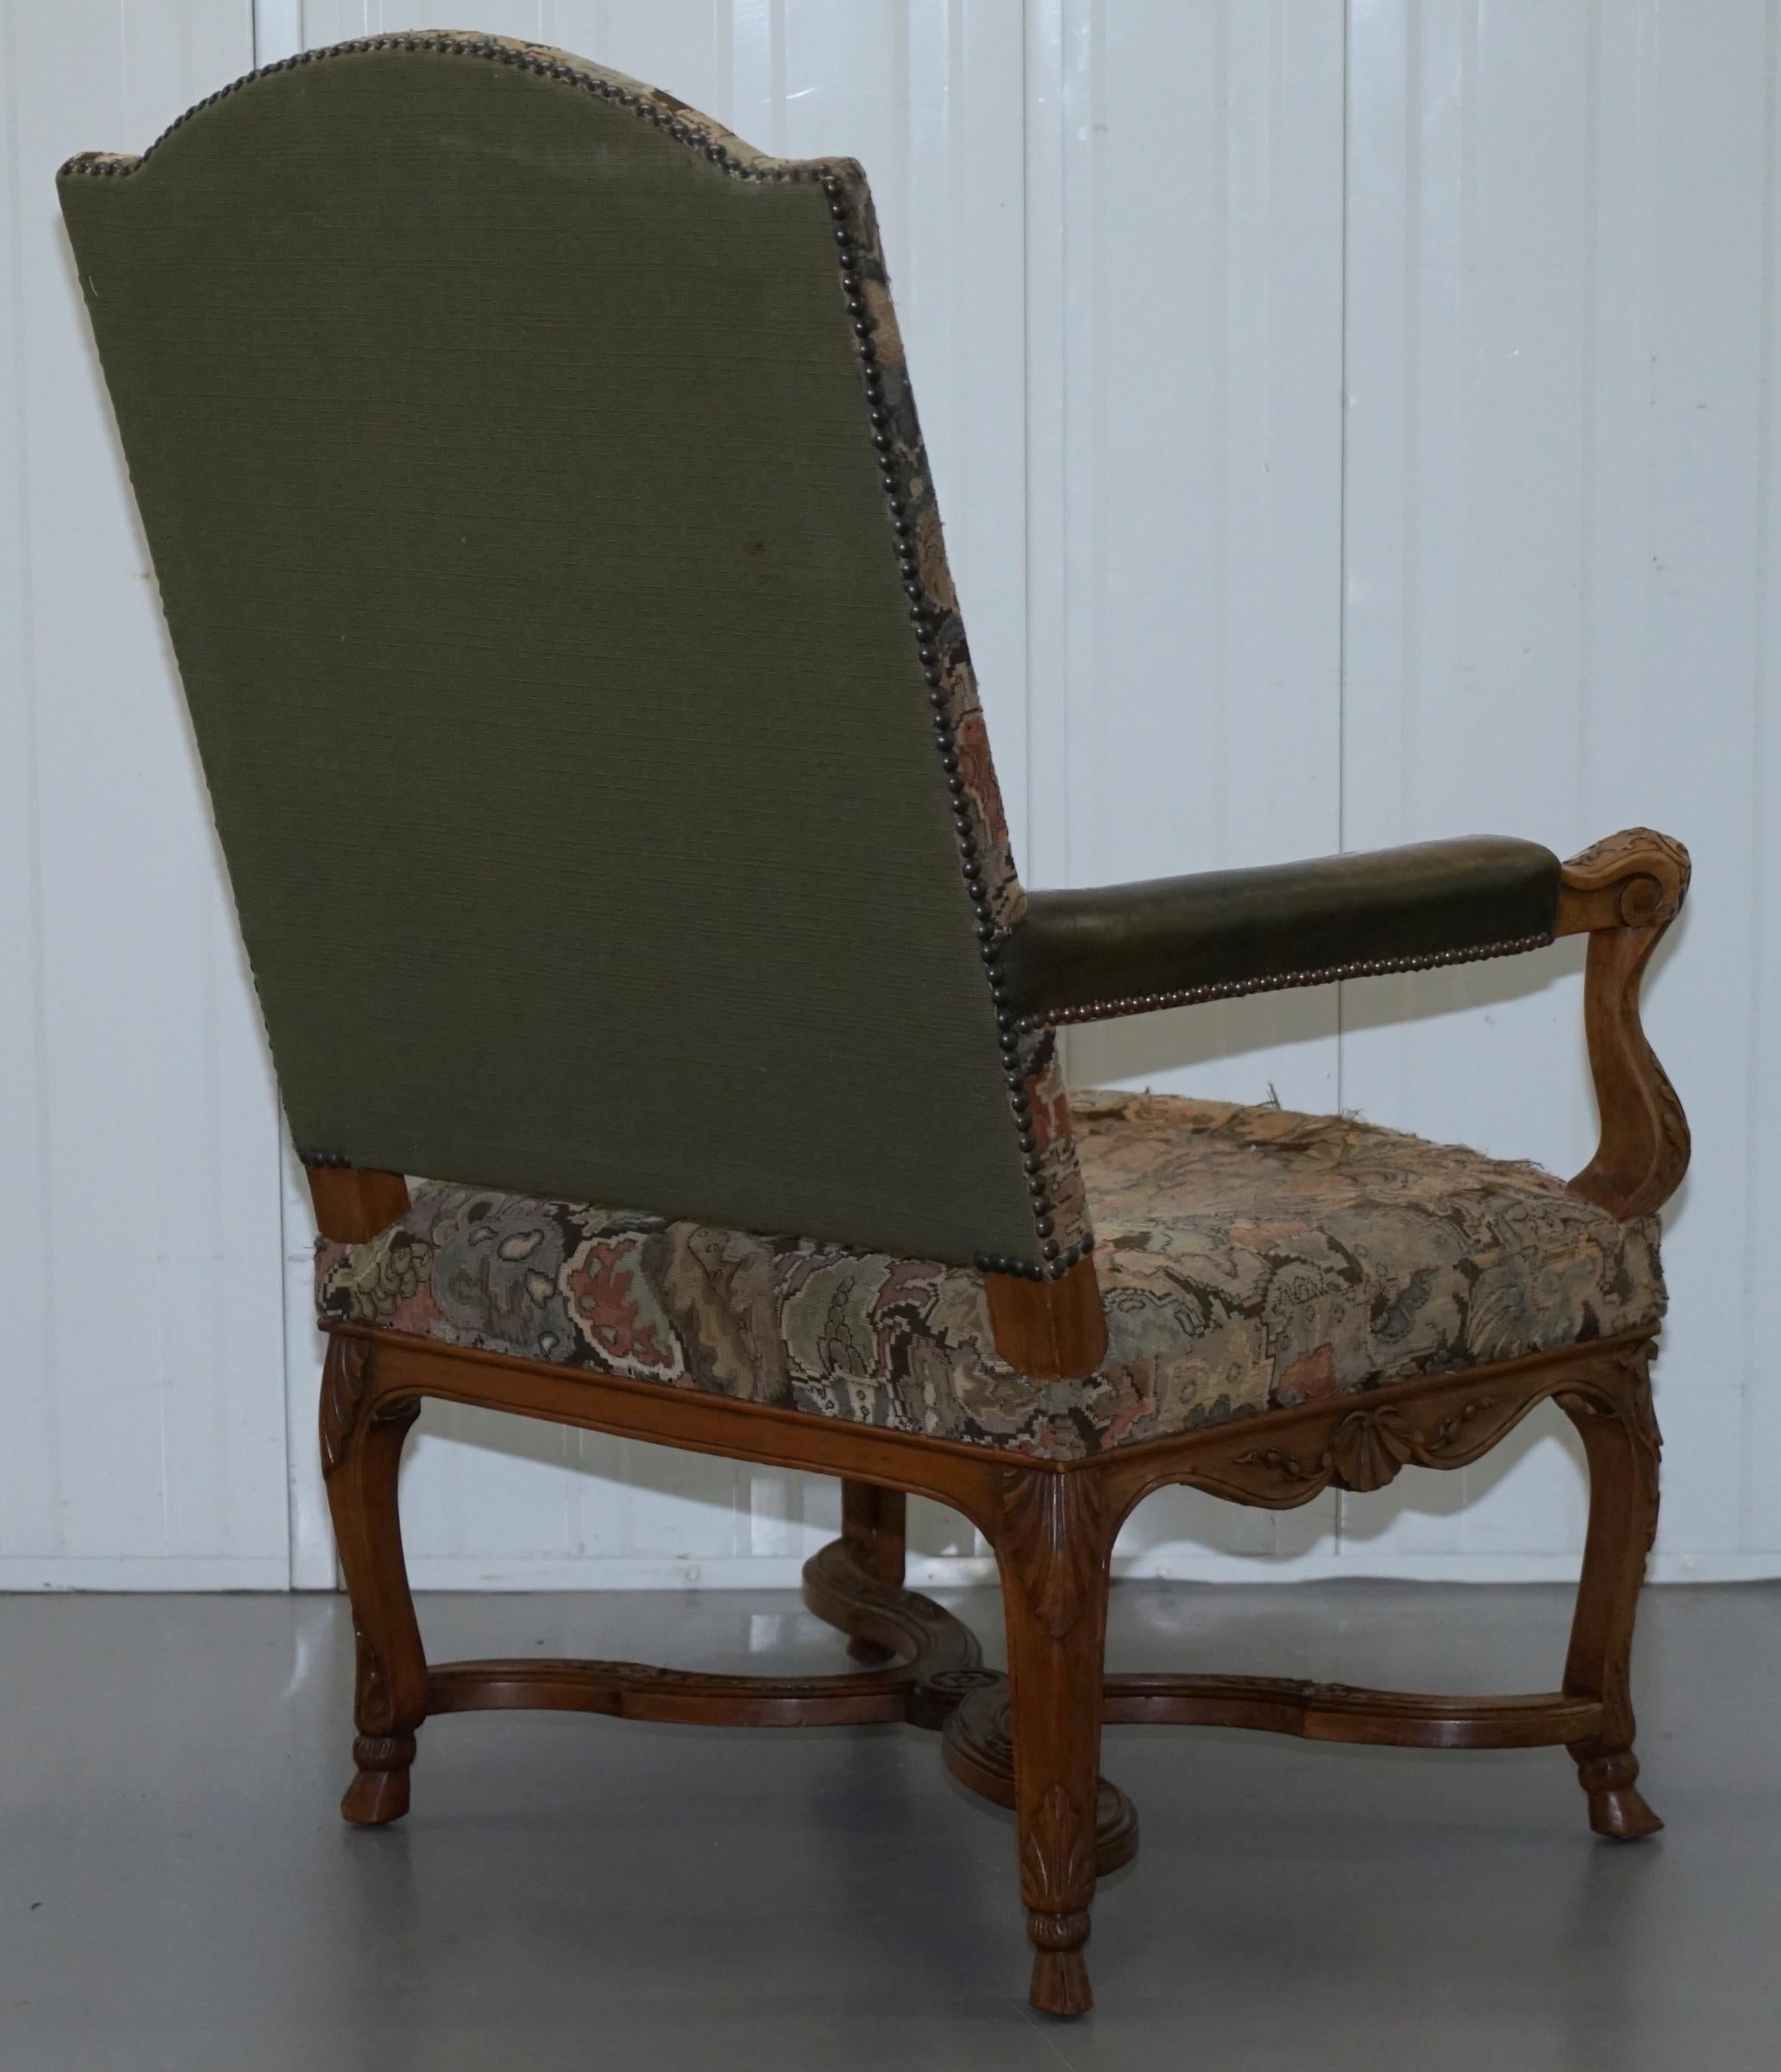 Rare 19th Century French Embroidered Armchair Ornately Carved Frame High Back For Sale 7